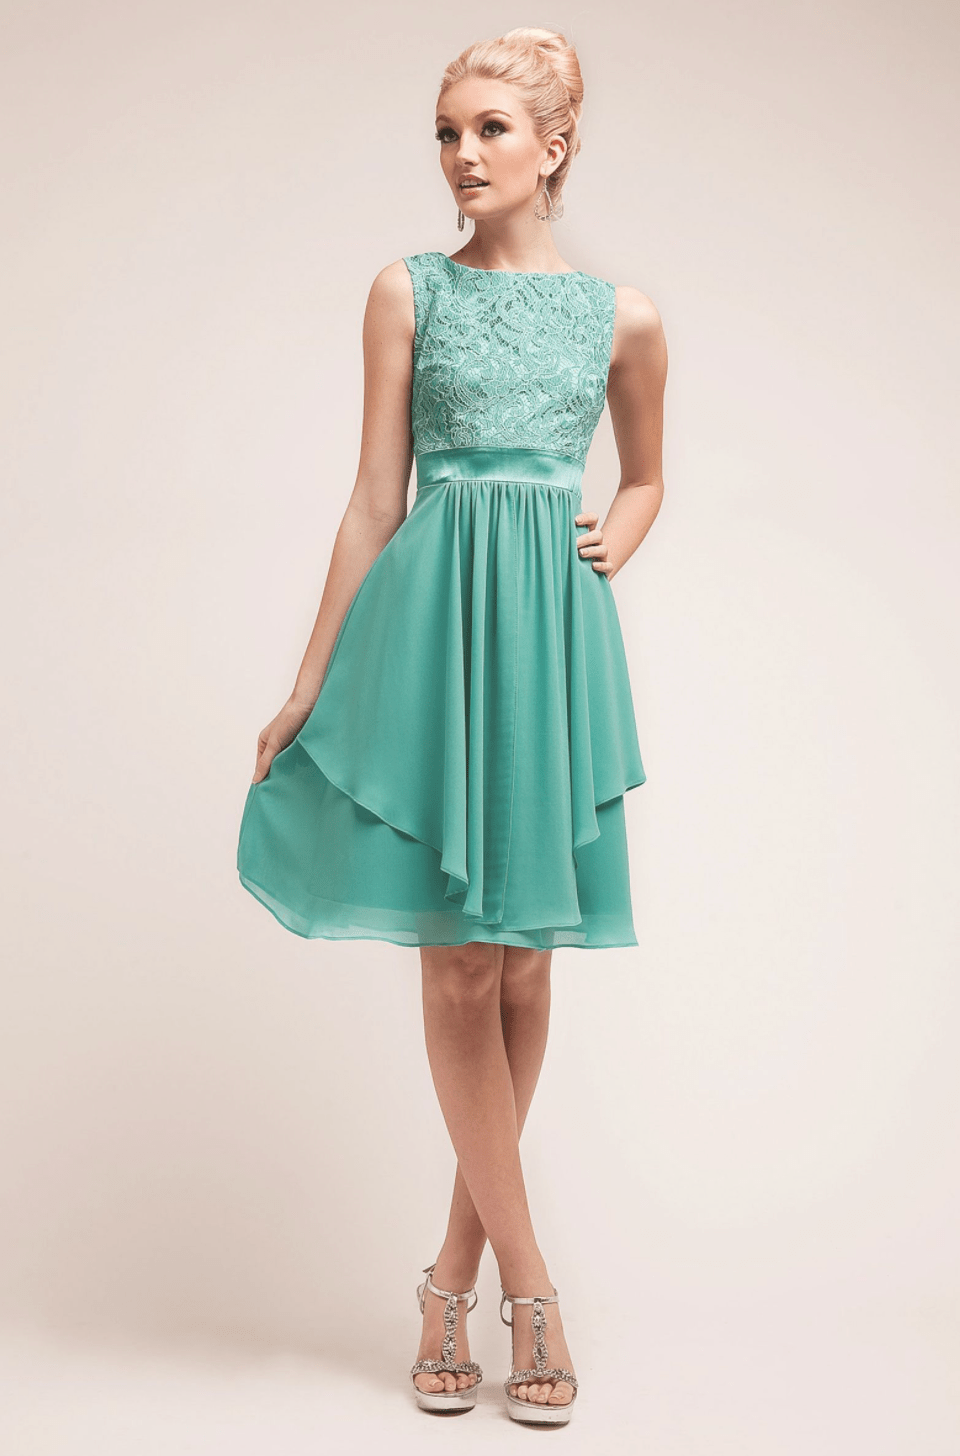 Turquoise Lace & Chiffon Short Dress by Cinderella Divine - NORMA REED